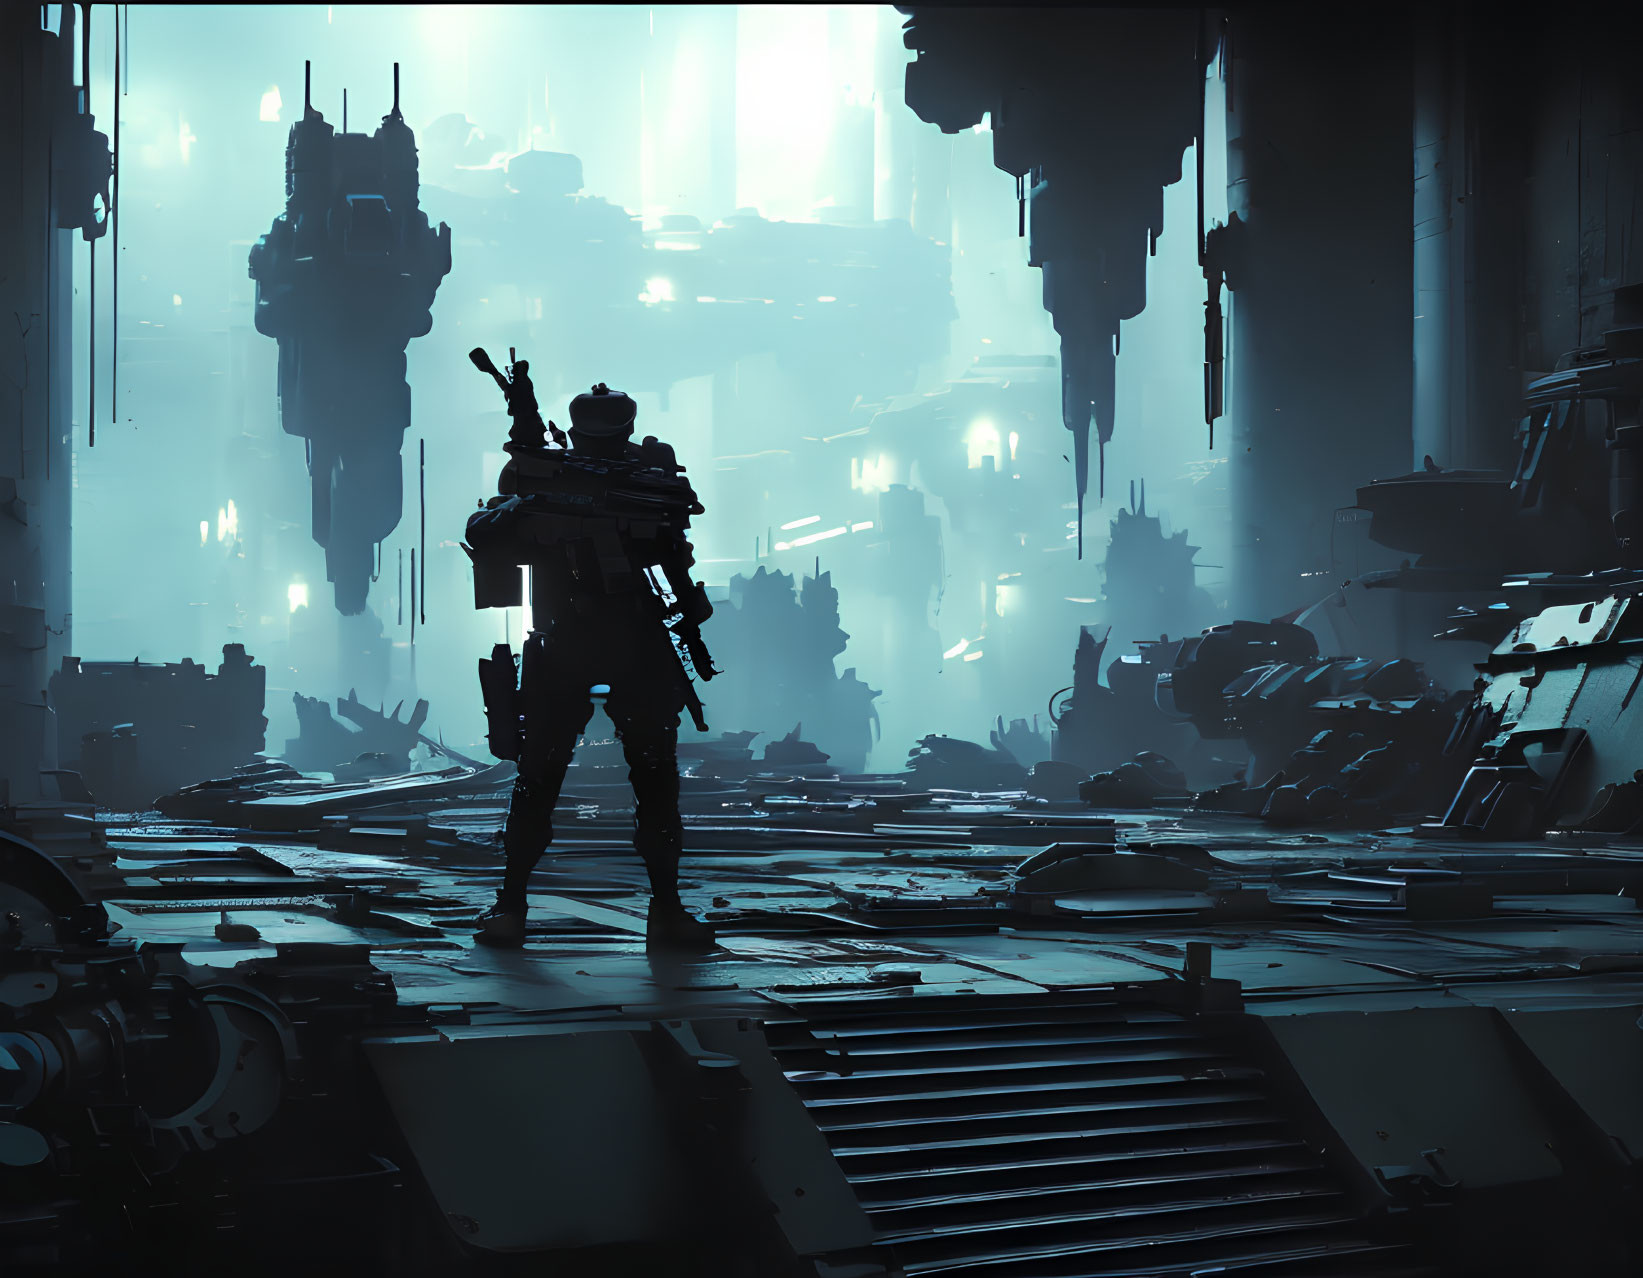 Lone figure in futuristic cityscape with towering structures and falling debris